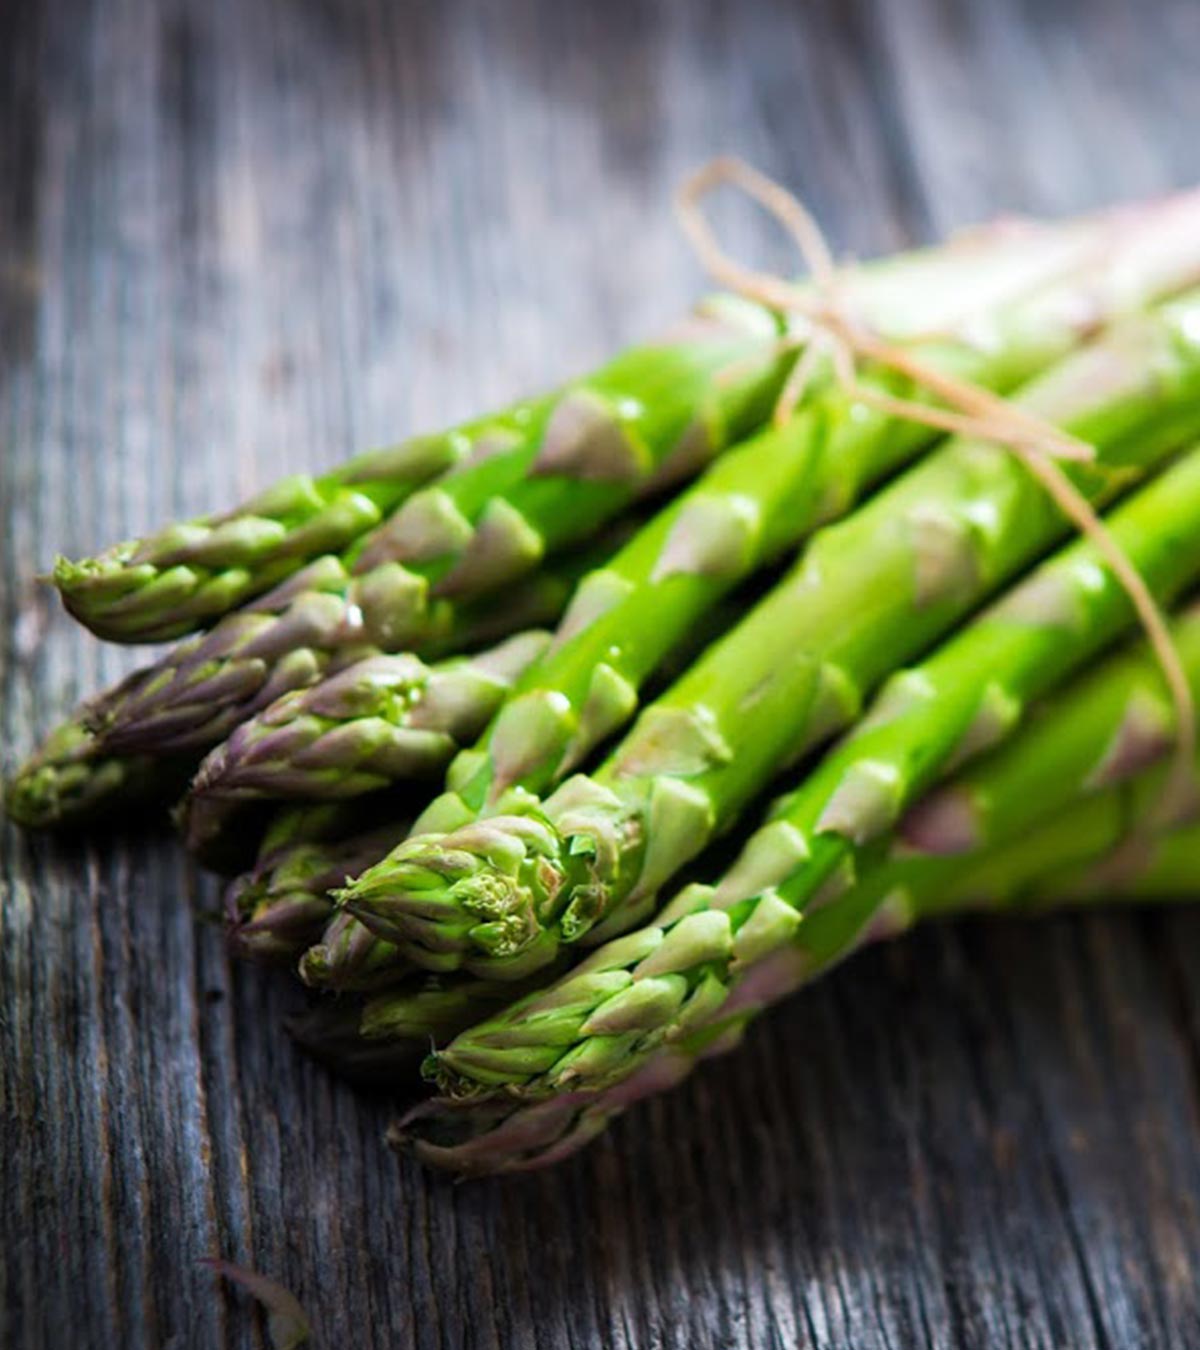 Healthy Pregnancy Diet: Is Asparagus Safe for Expecting Mothers?